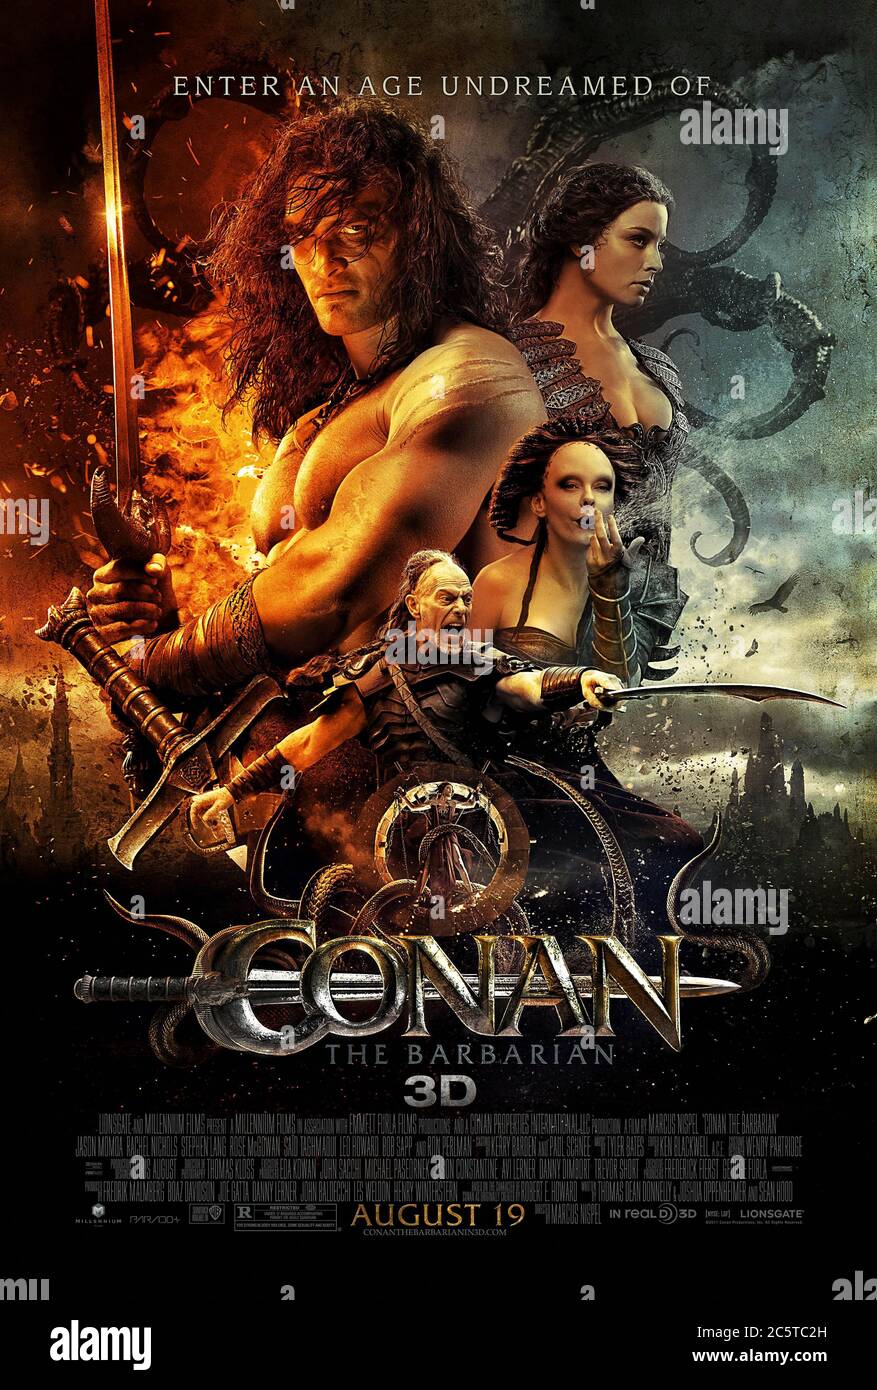 Conan the Barbarian (2011) directed by Marcus Nispel and starring Jason Momoa, Ron Perlman, Rose McGowan, Stephen Lang and Rachel Nichols. A return to the big screen for the pulp fiction fantasy hero who seeks revenge against the evil warlord that killed his father. Stock Photo